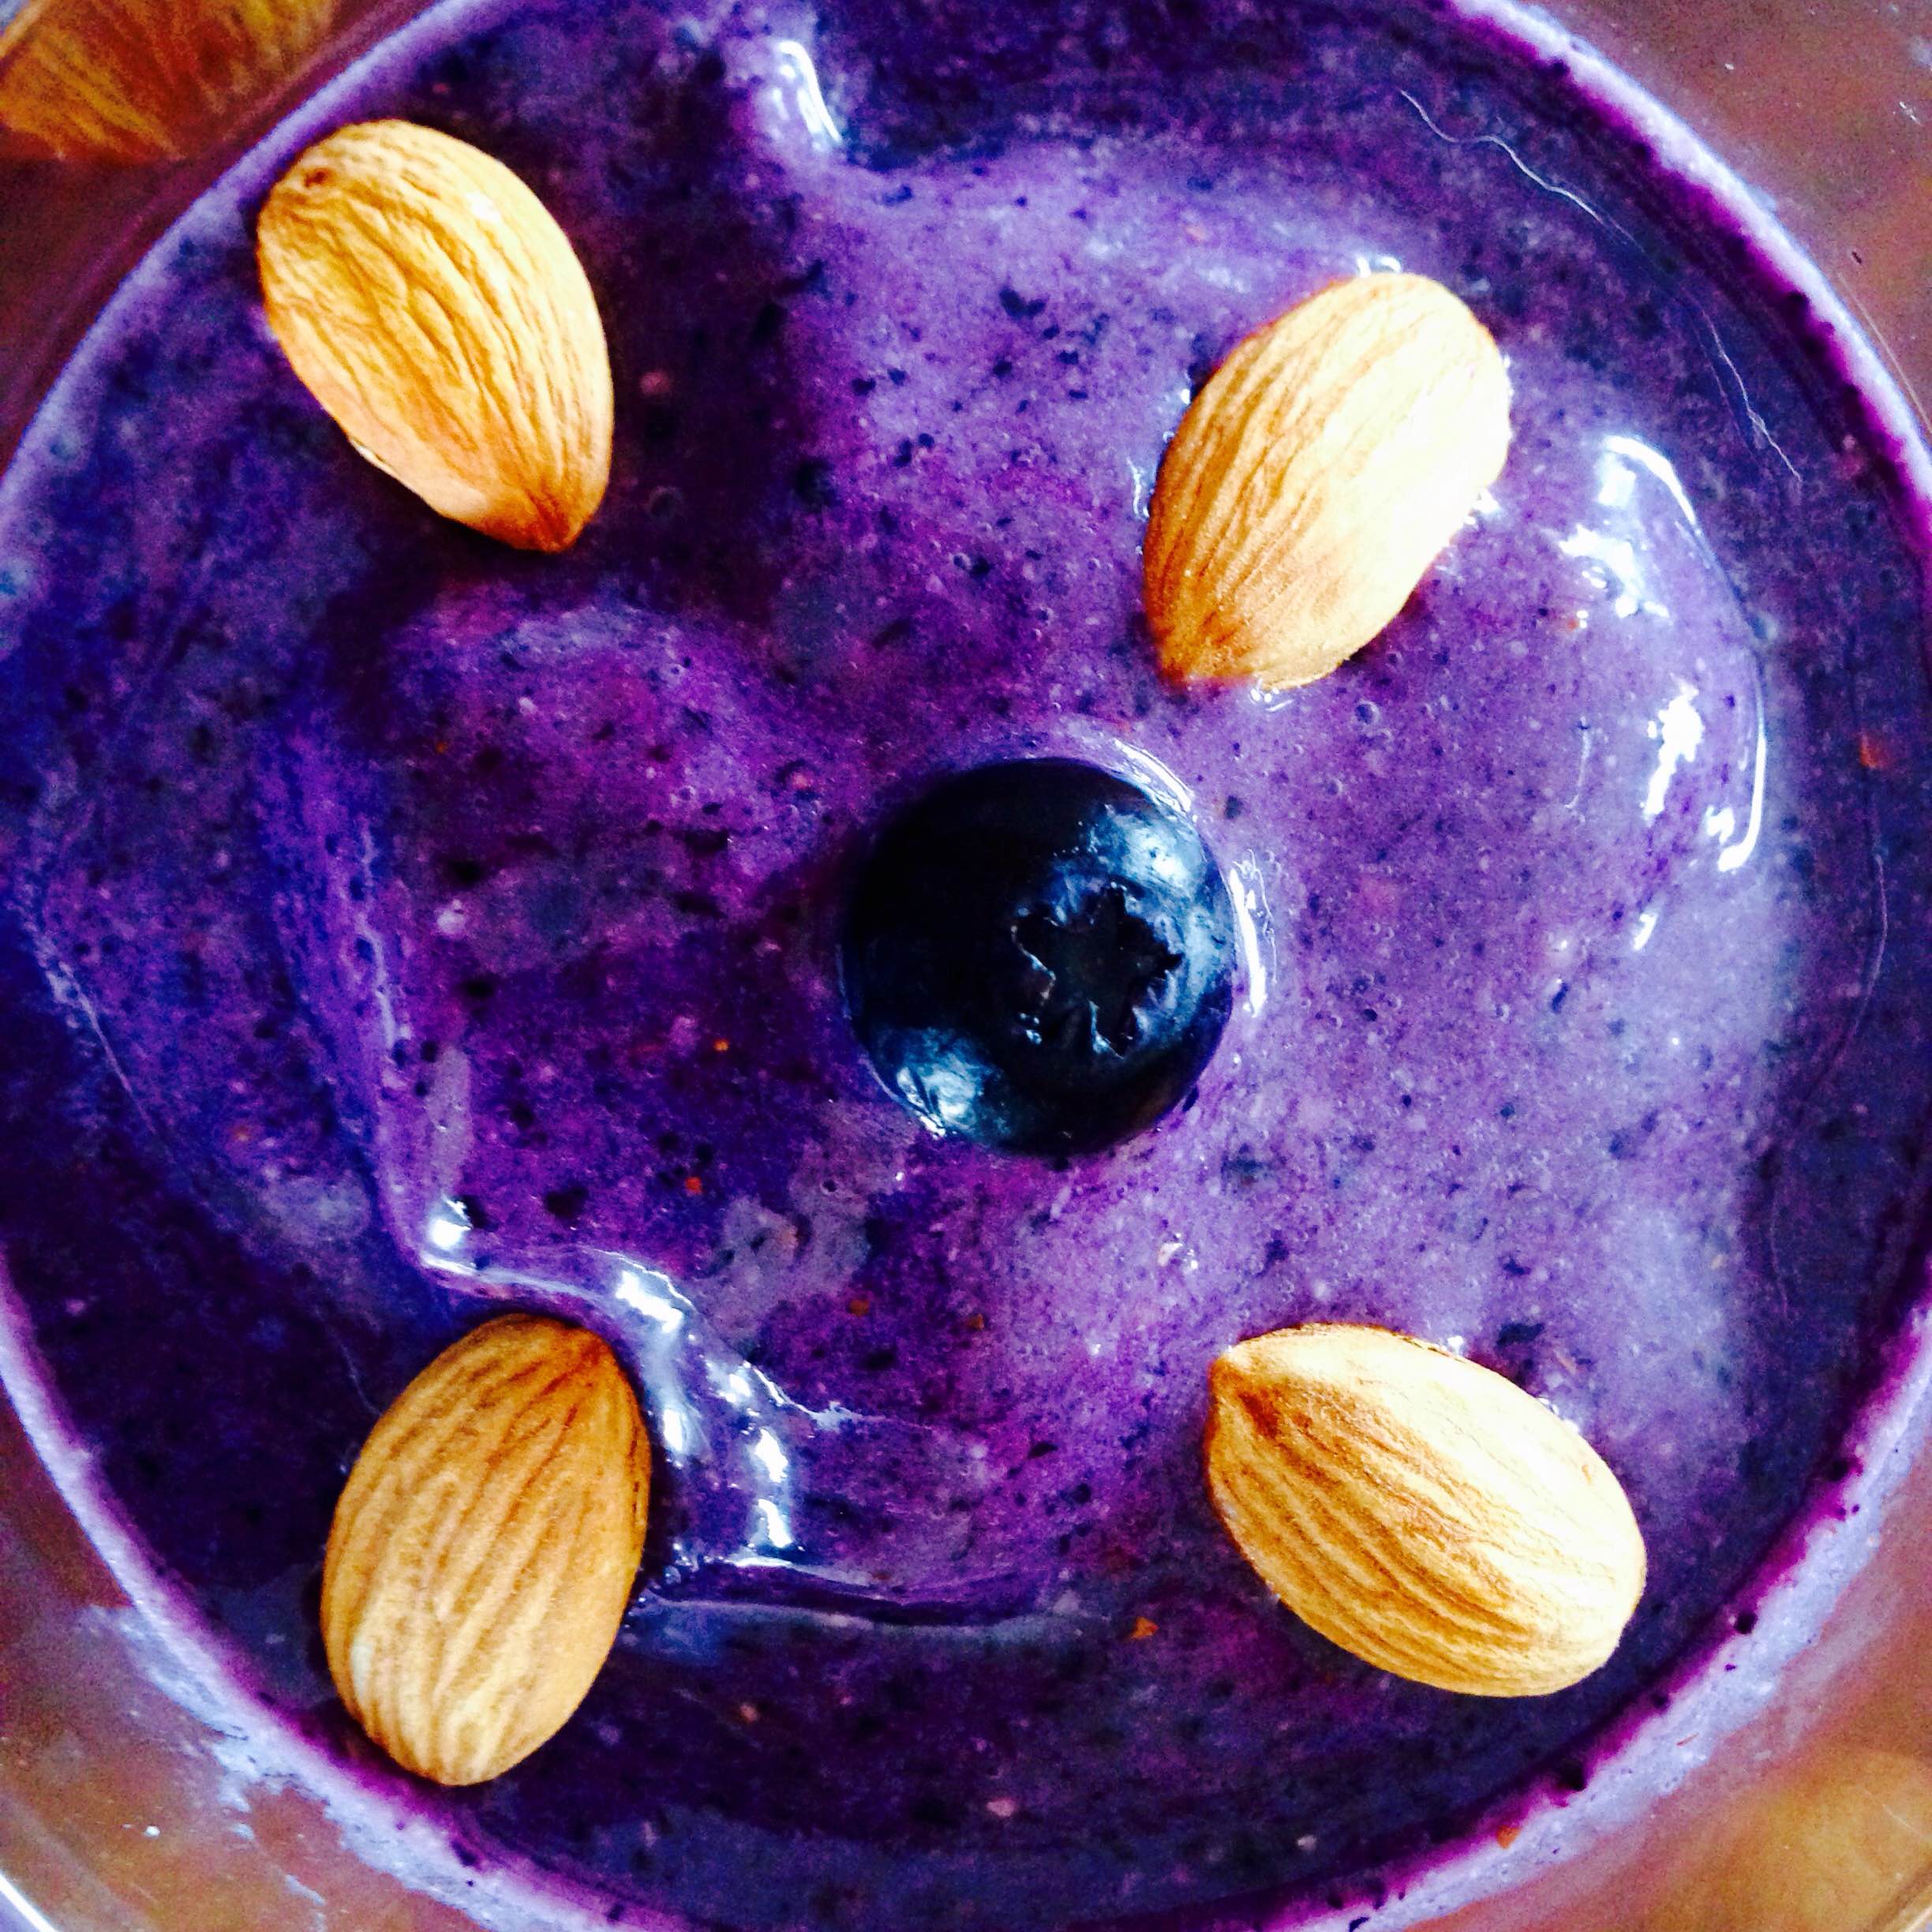 Blueberry and almond smoothie